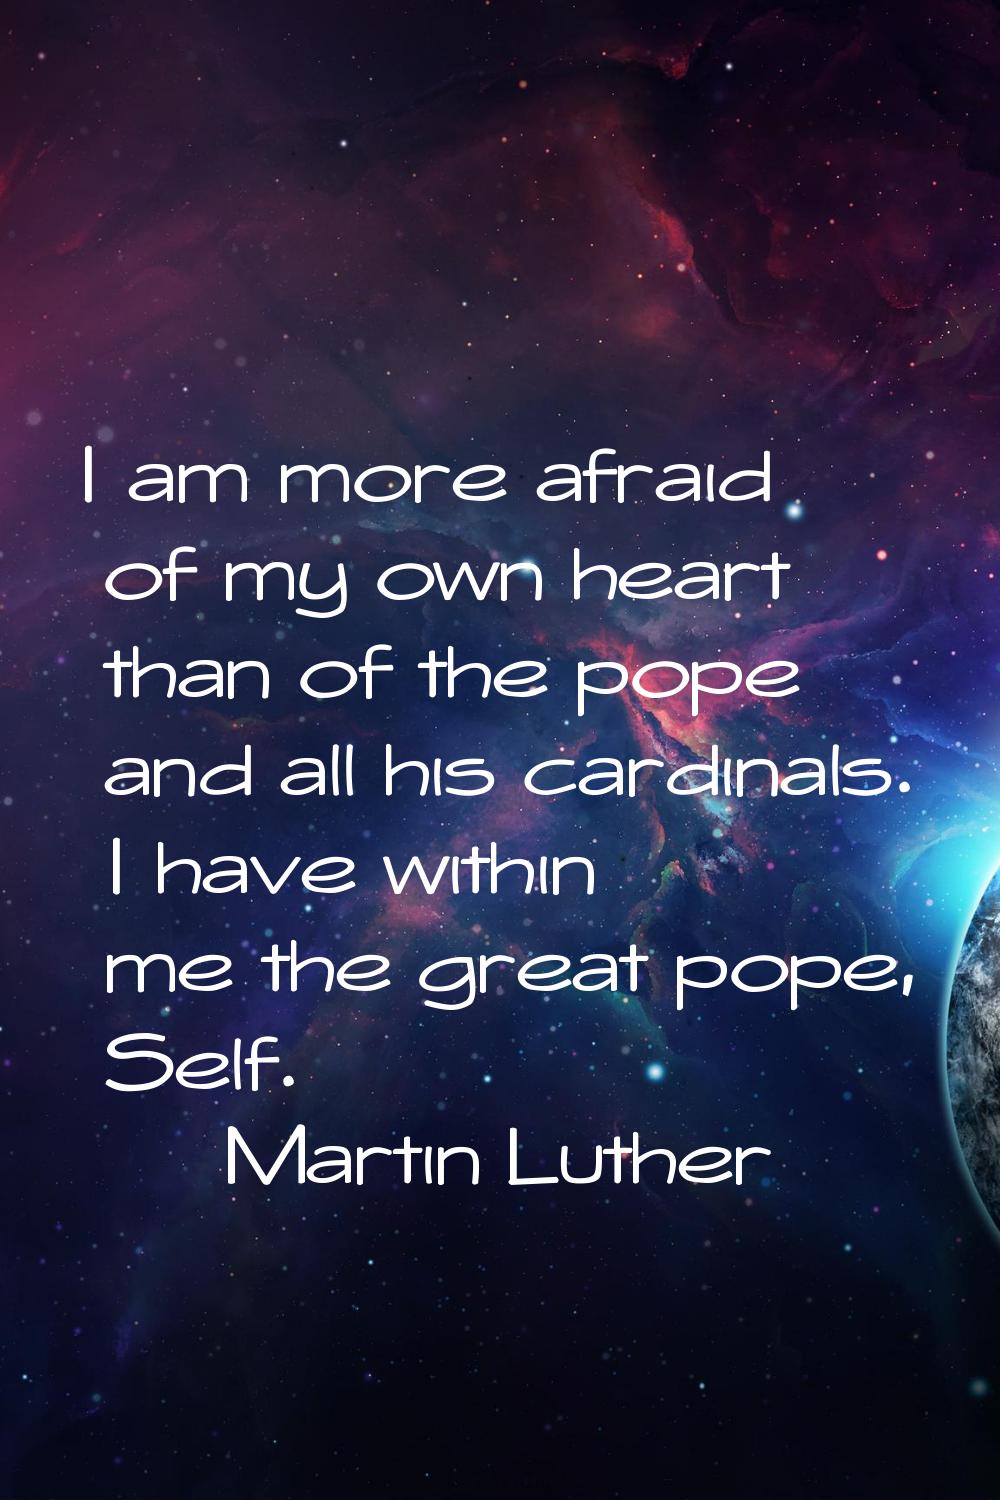 I am more afraid of my own heart than of the pope and all his cardinals. I have within me the great